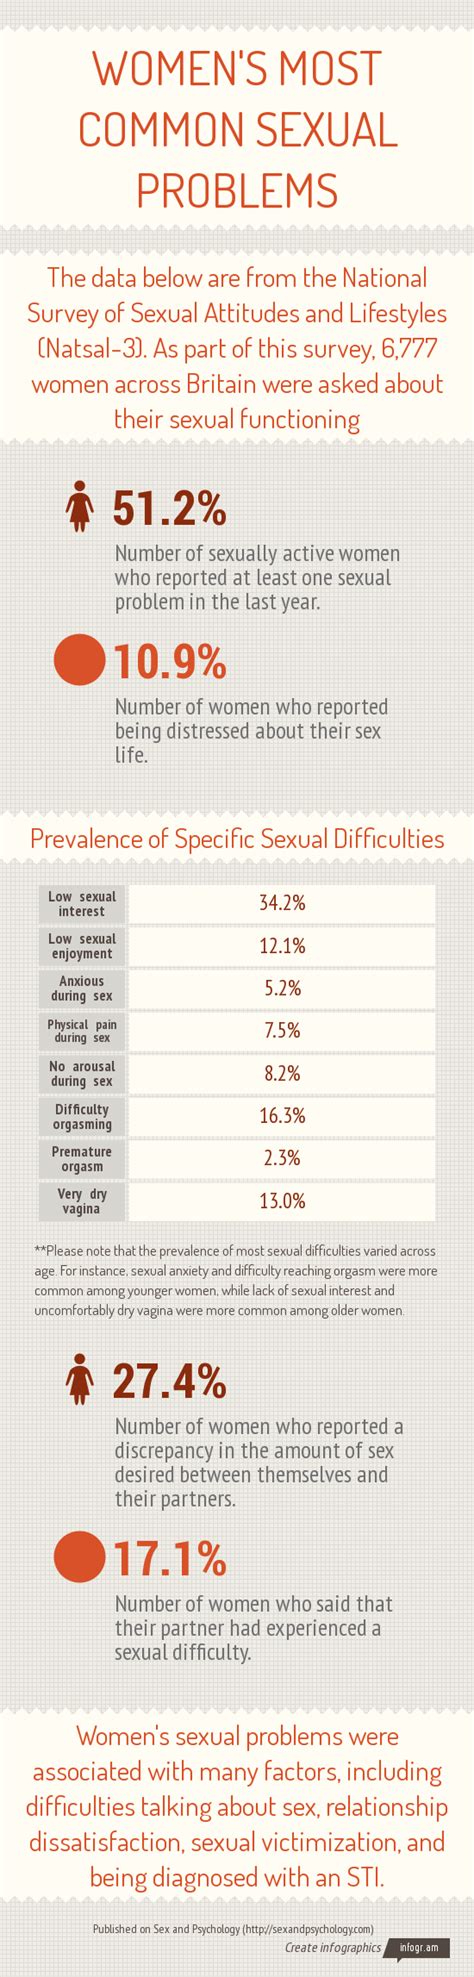 women s most common sexual problems infographic — sex and psychology